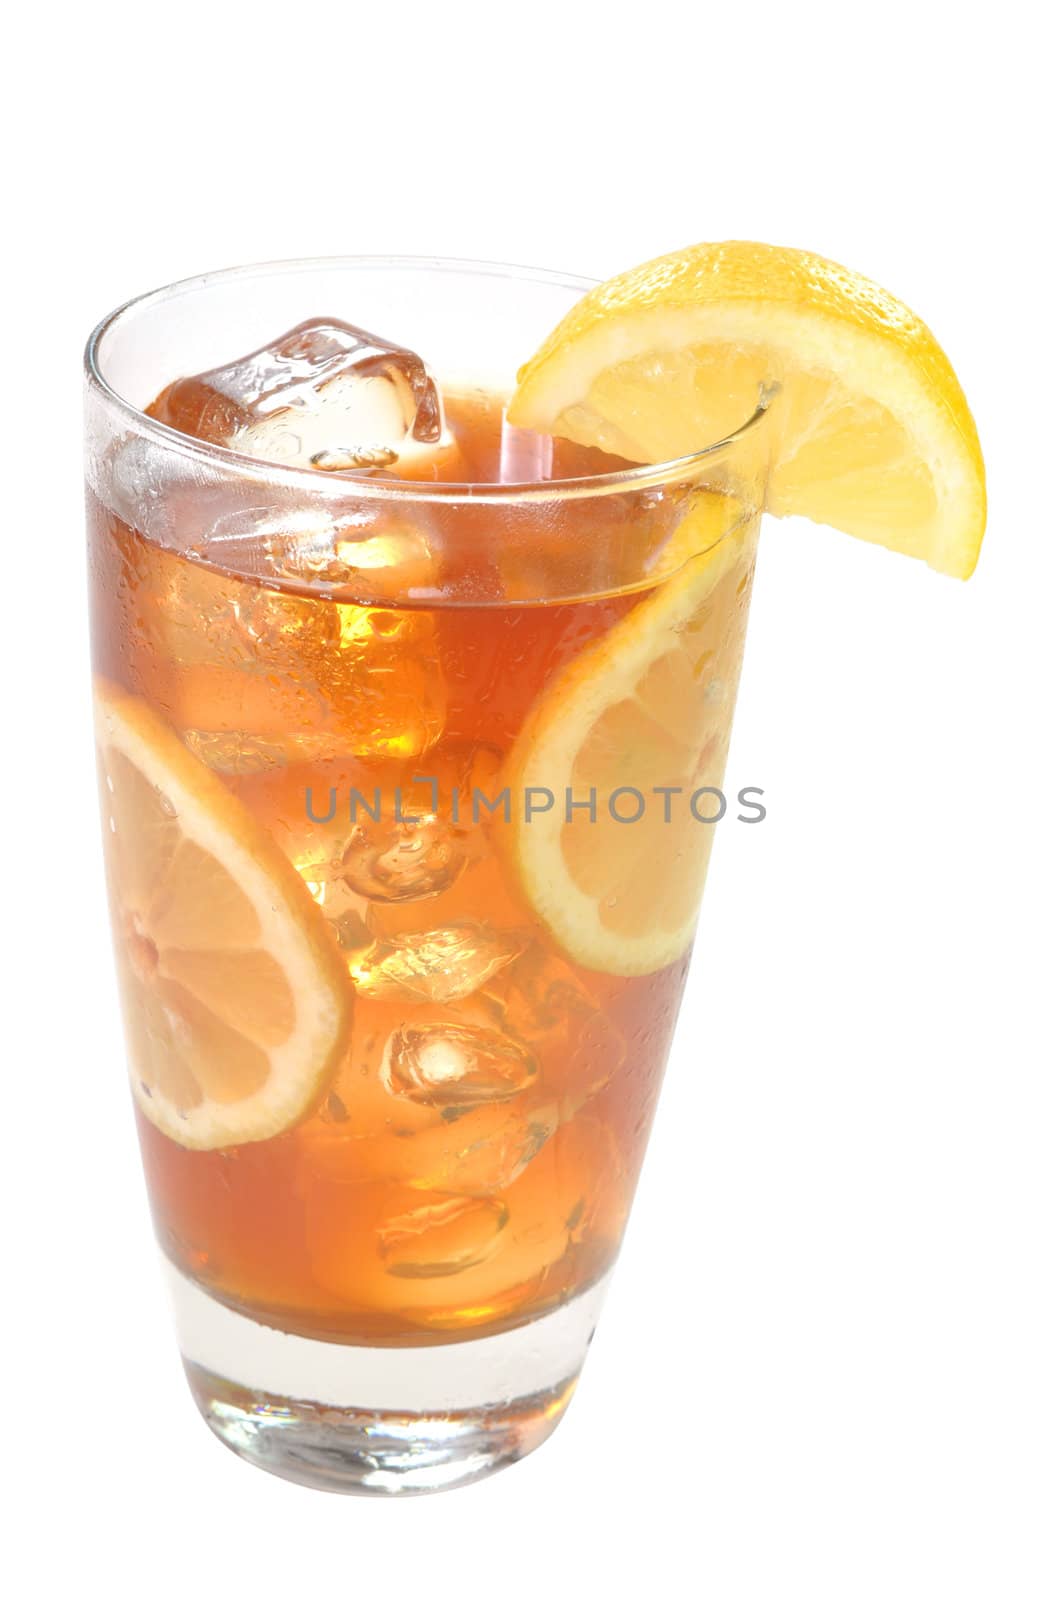 Glass of iced tea with lemons.  Isolated on white background with clipping path.